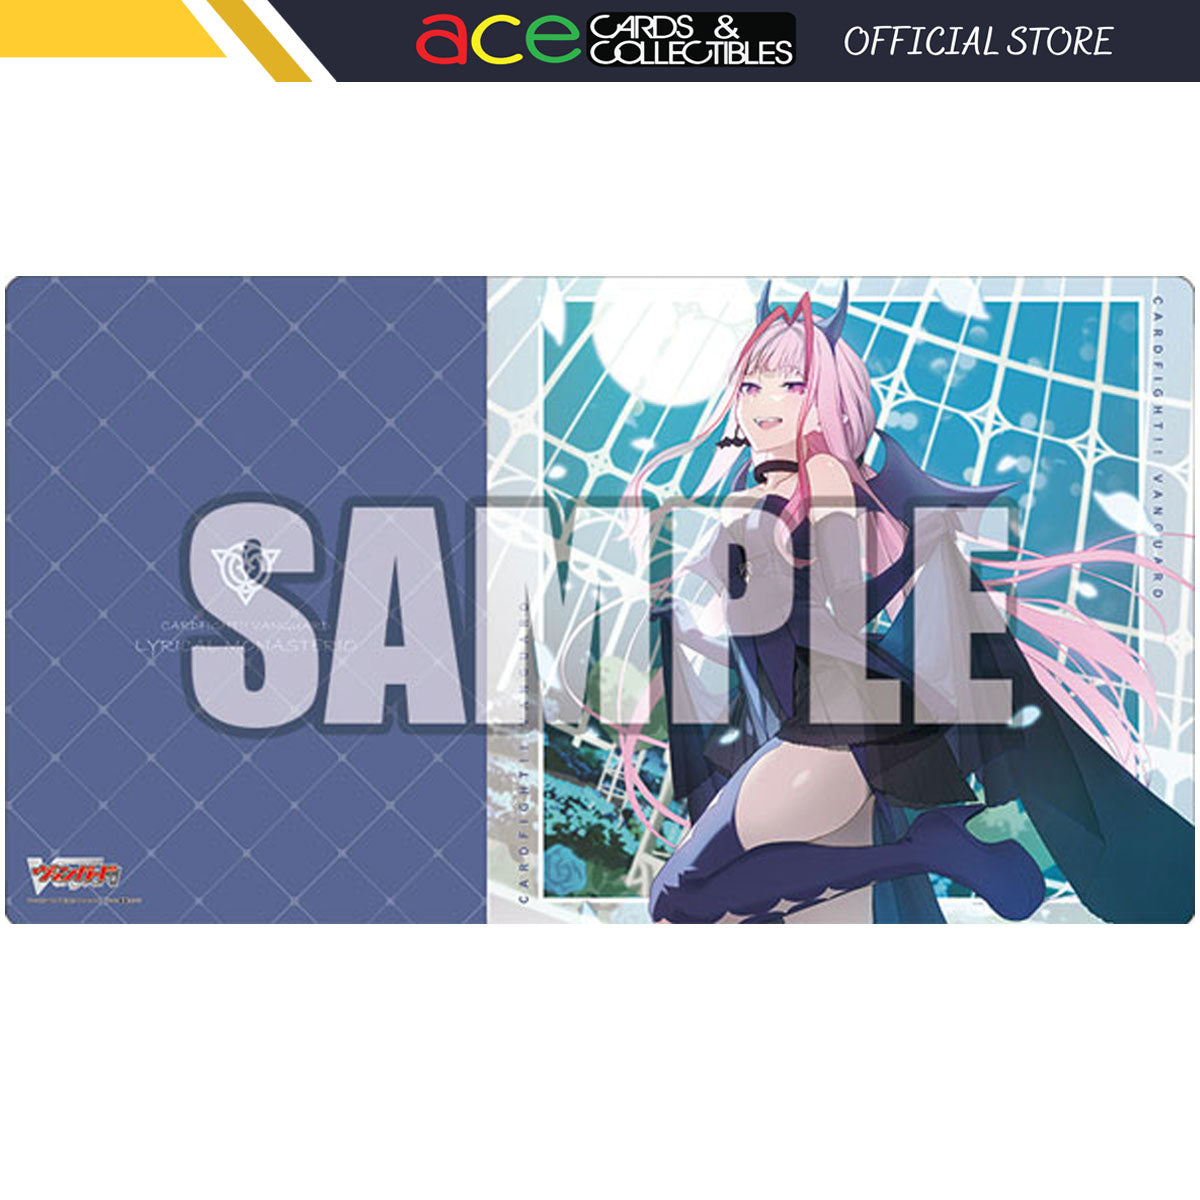 CardFight Vanguard Playmat Collection V2 Vol. 383 "Rondo of Eventide Moon, Feltyrosa"-Bushiroad-Ace Cards & Collectibles